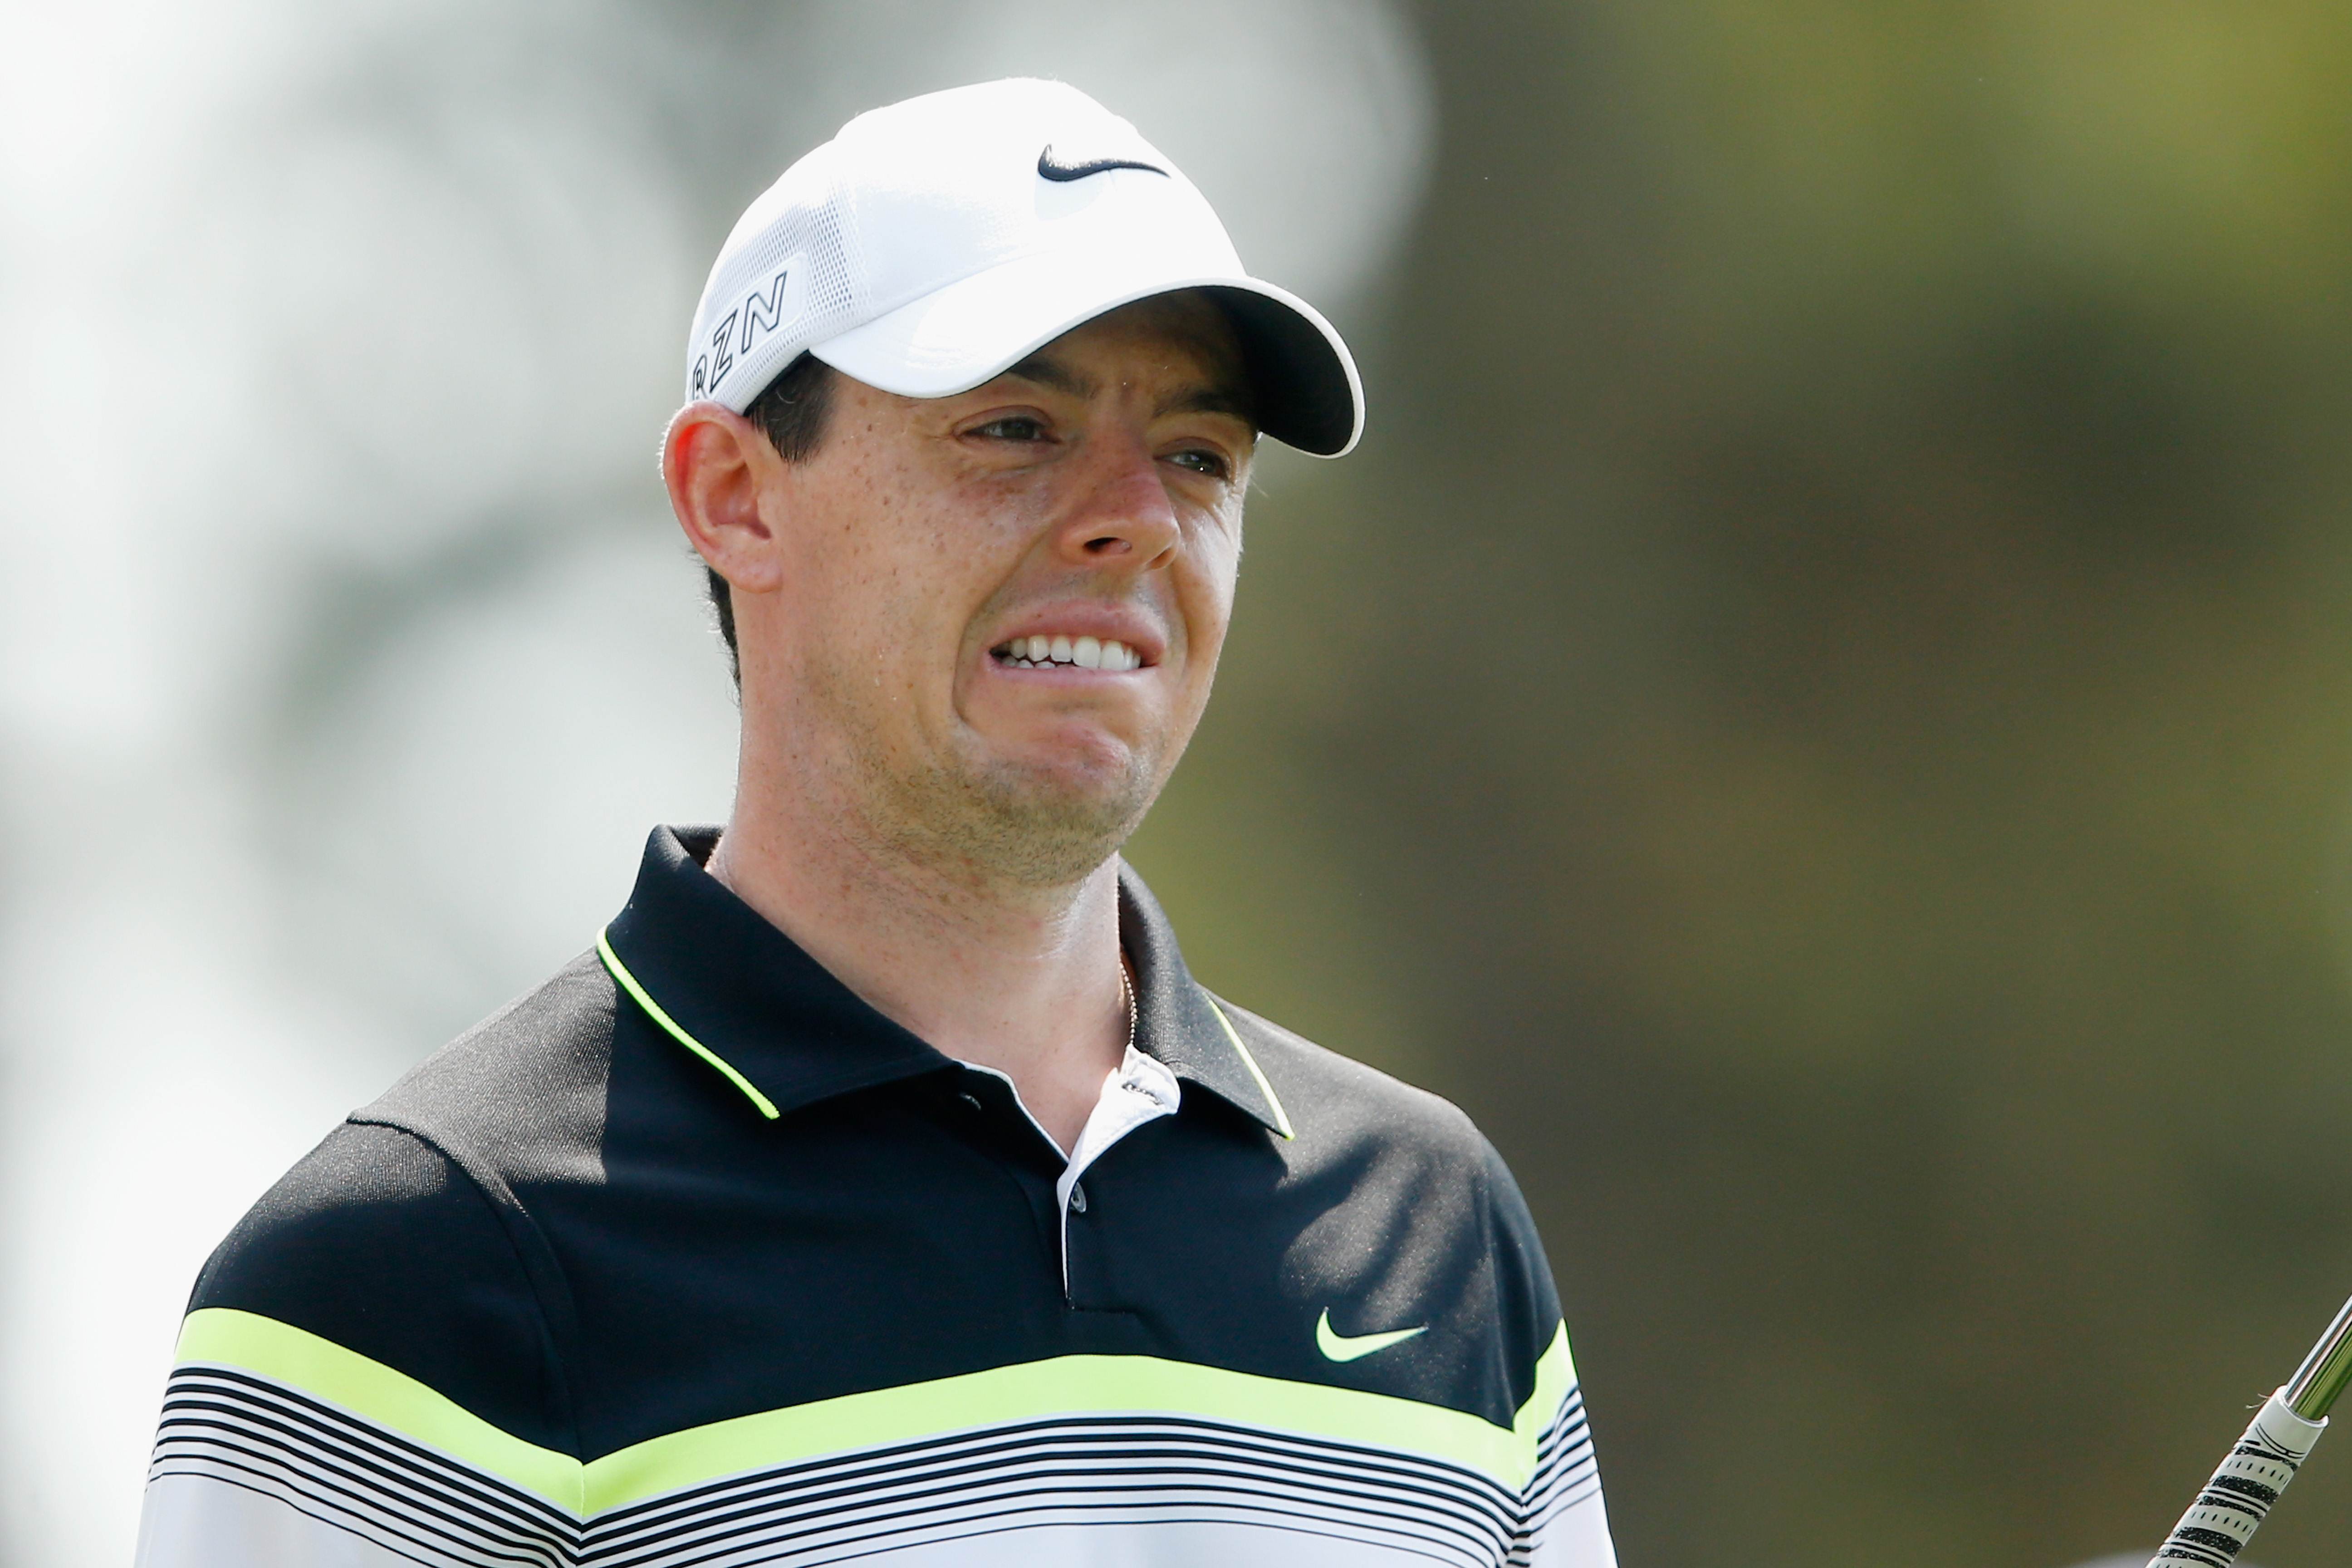 Rory McIlroy scrambled to a 71 that keeps him in the hunt, but he needs to raise his game. Photo: AFP